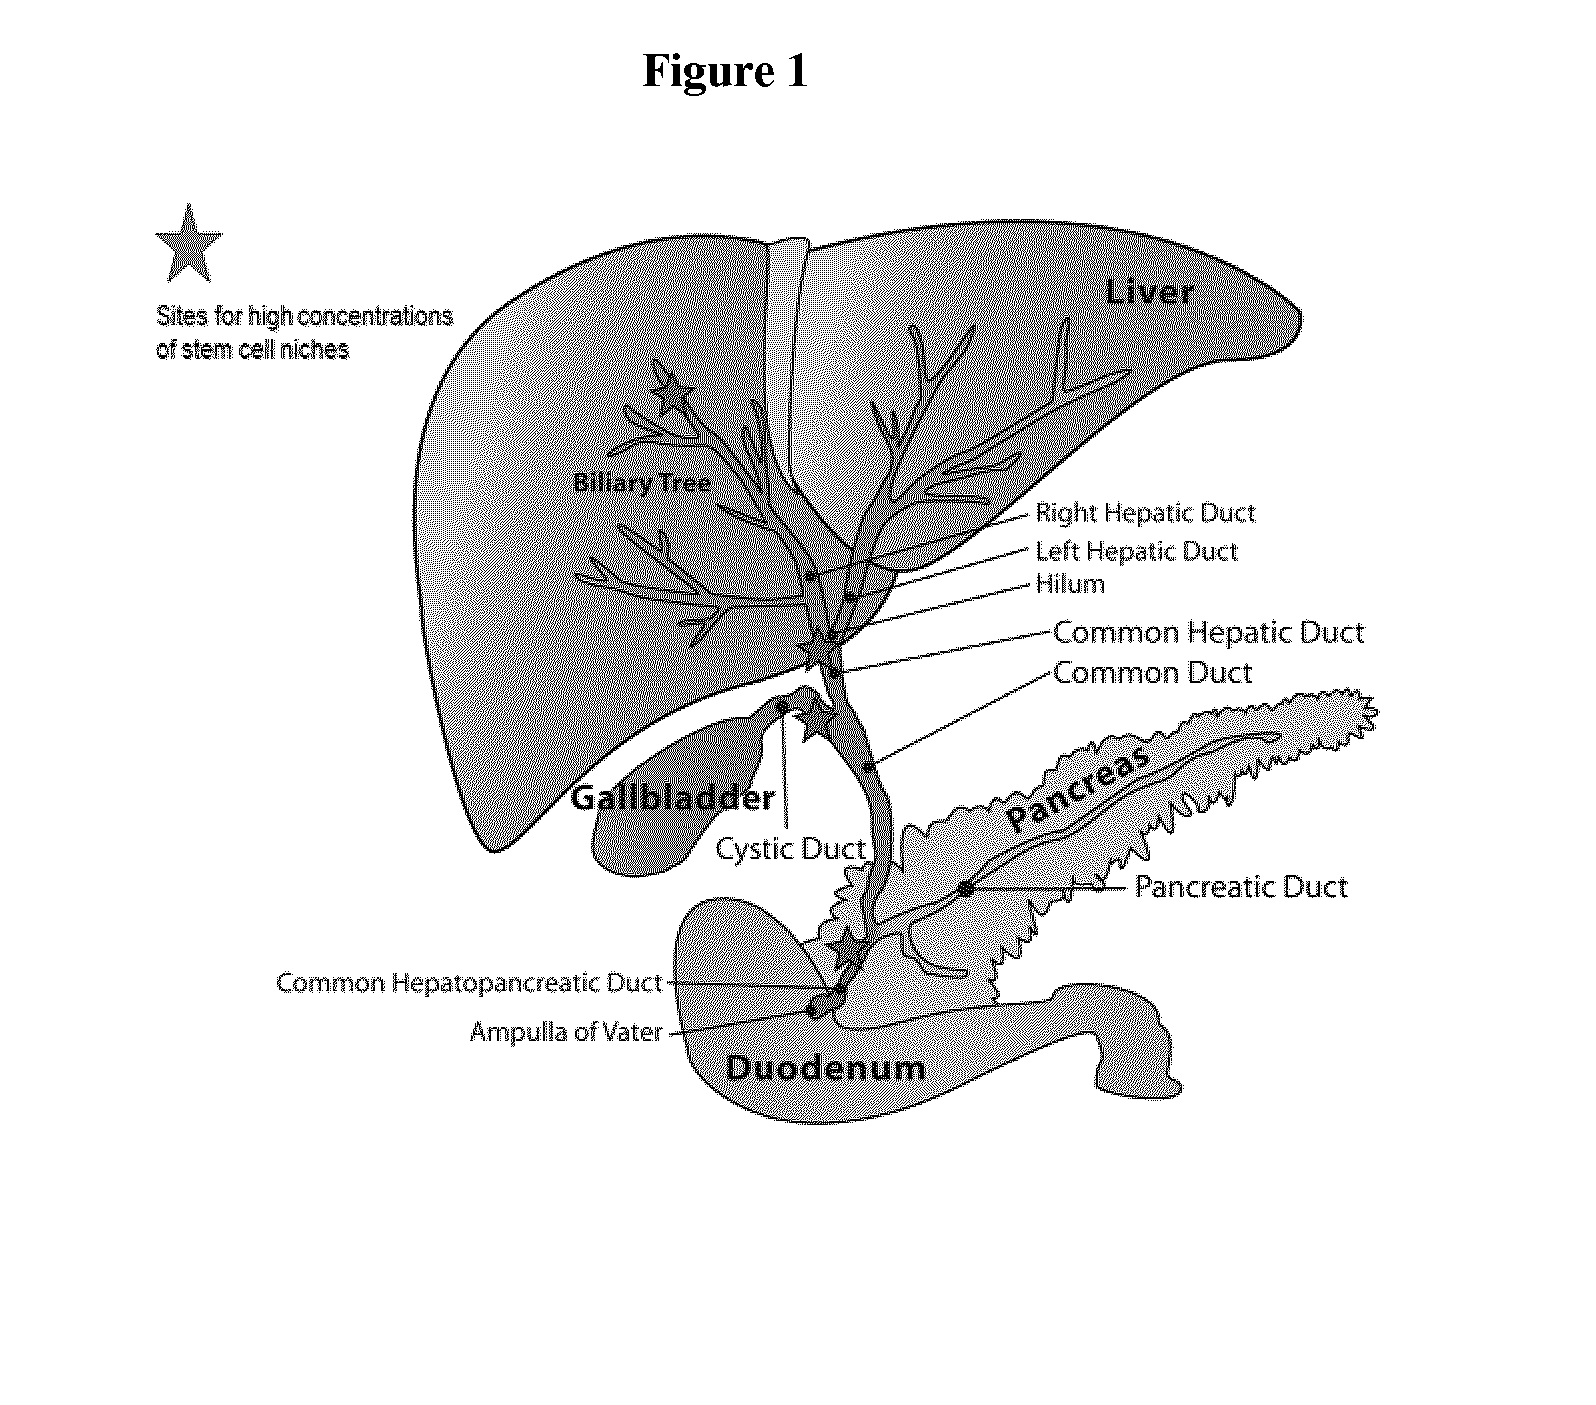 Method of treating pancreatic and liver conditions by endoscopic-mediated (or laparoscopic-mediated) transplantation of stem cells into/onto bile duct walls of particular regions of the biliary tree